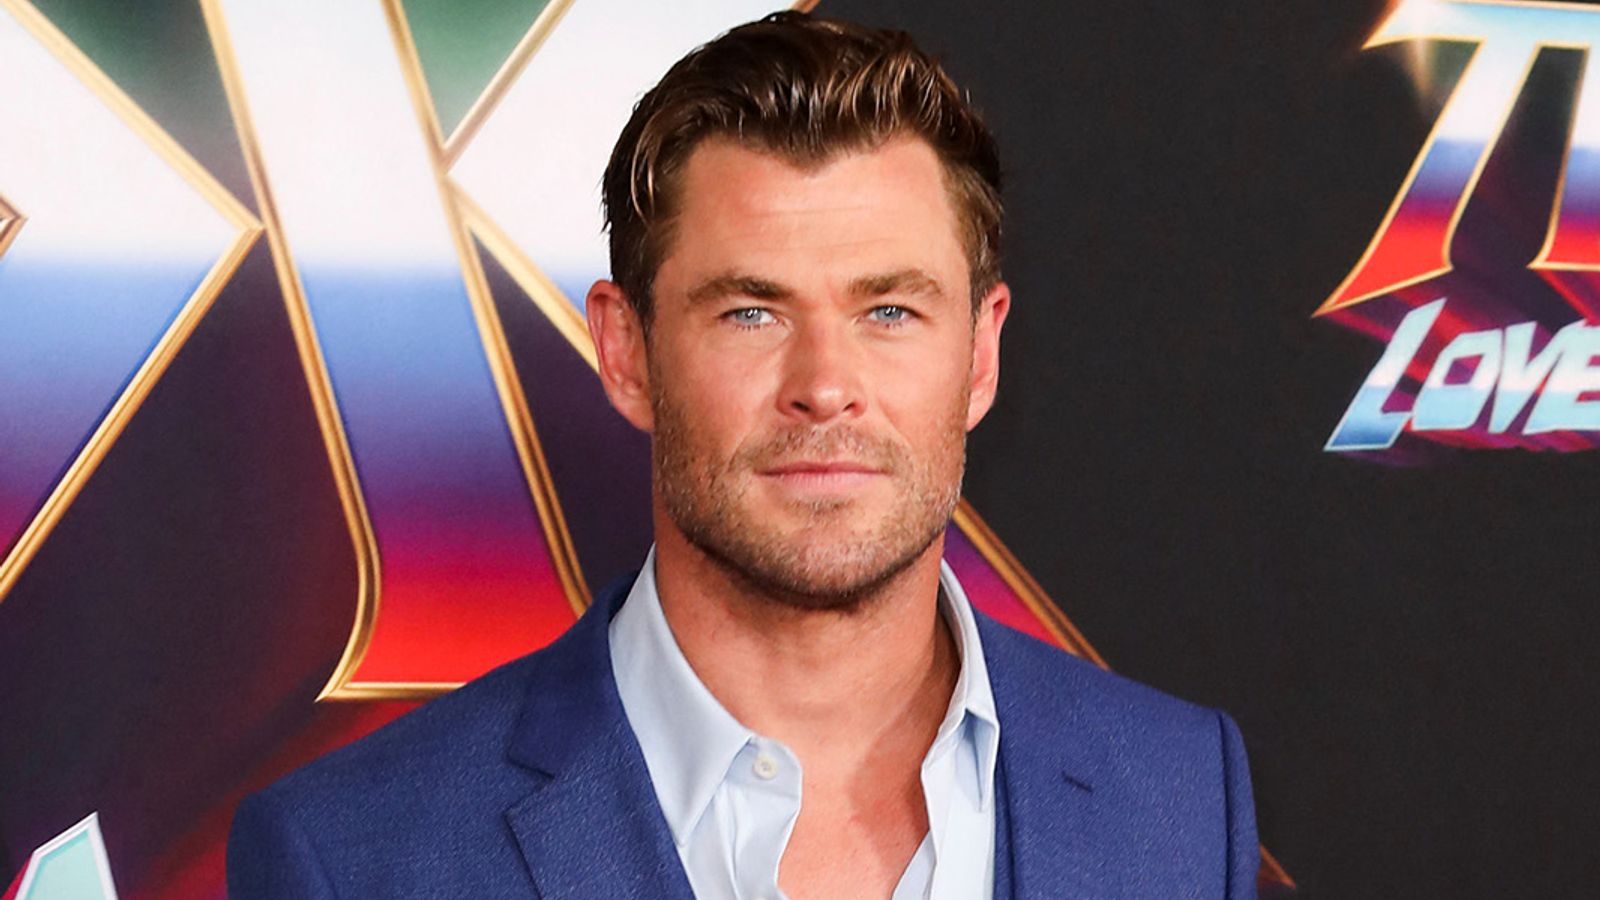 Chris Hemsworth to 'take a break' from acting following Alzheimer's warning